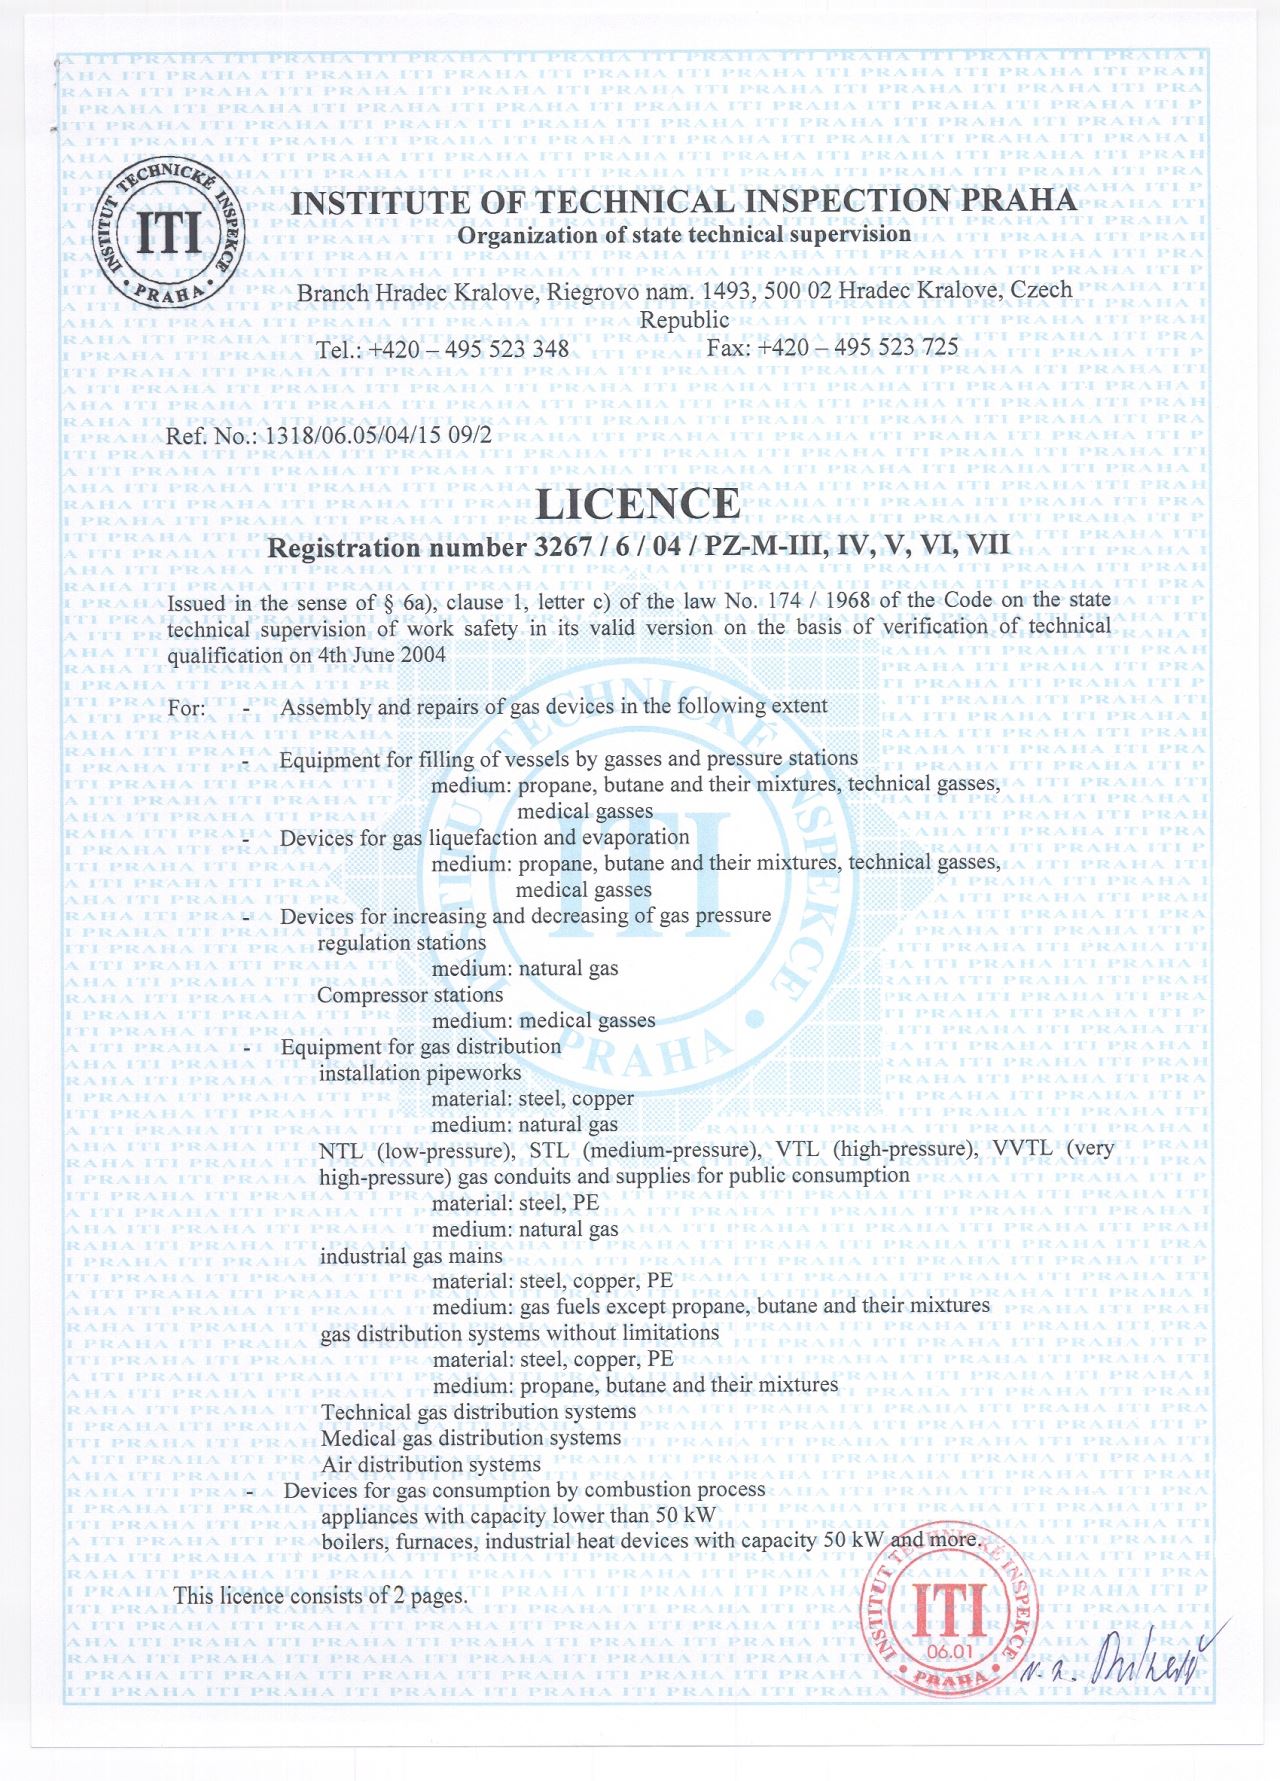 Licence for  assembly and repairs of gas devices_01